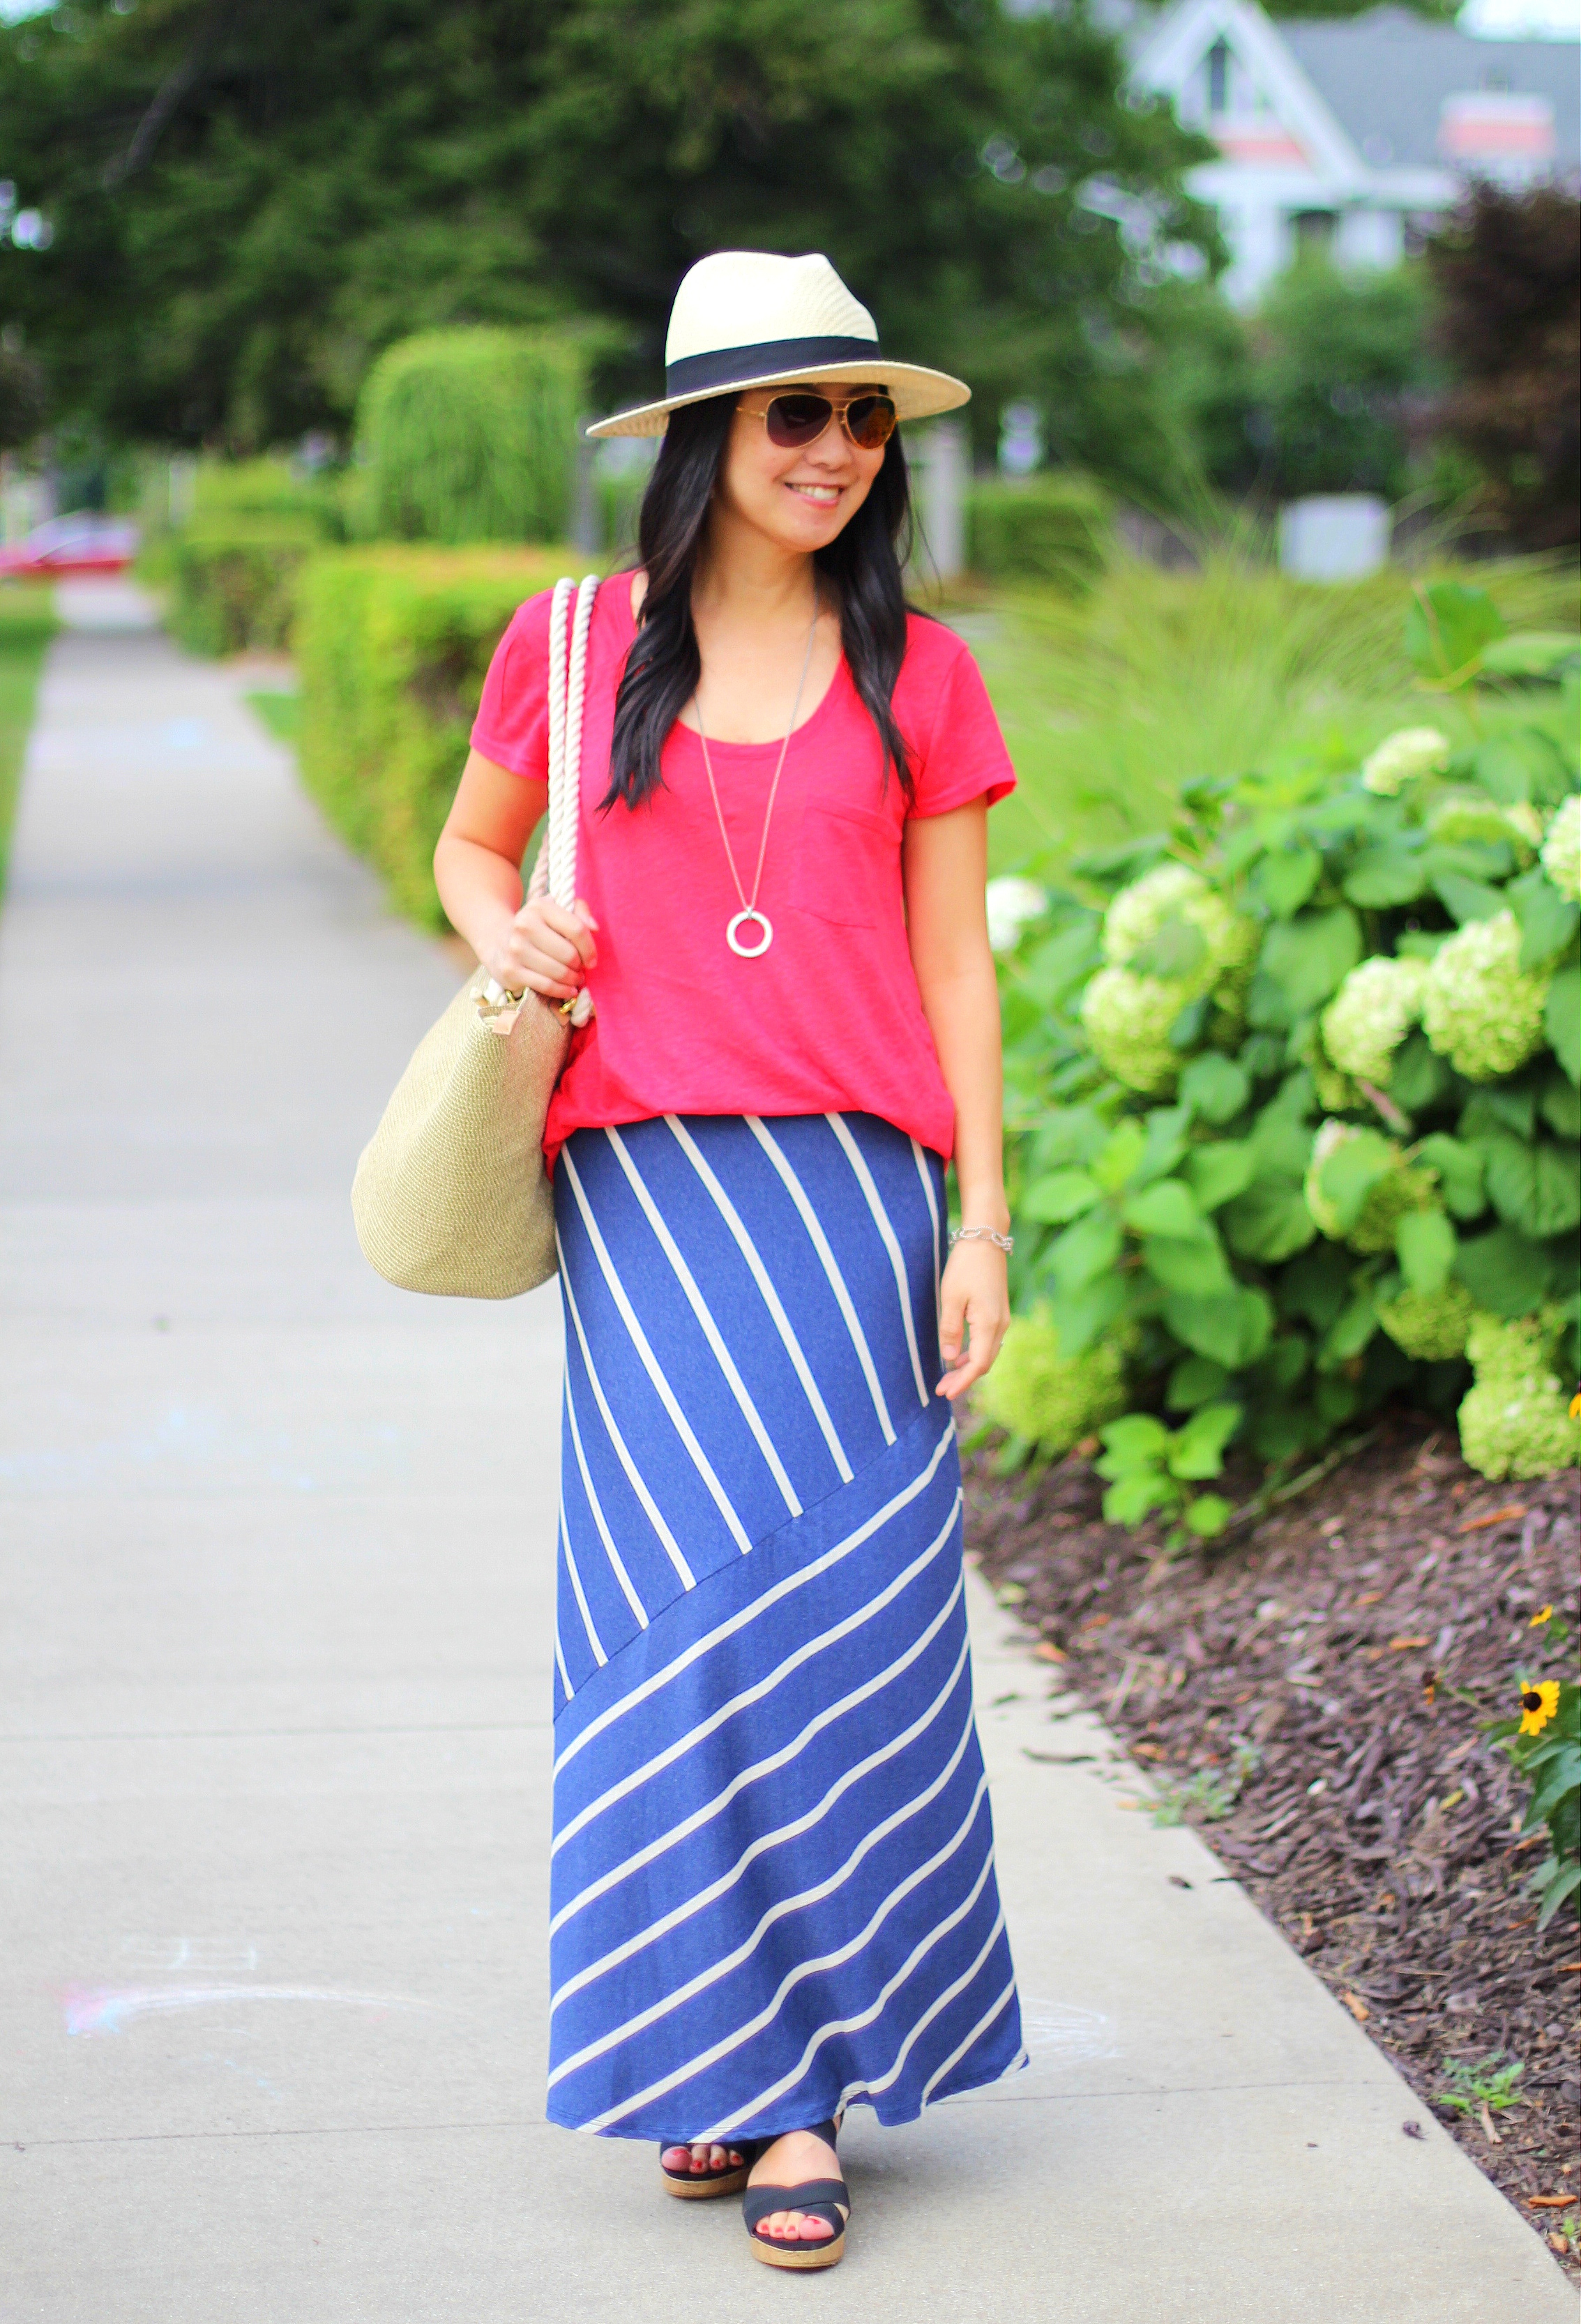 Outfit Highlight: Easy Breezy by the Shore - My Rose Colored Shades